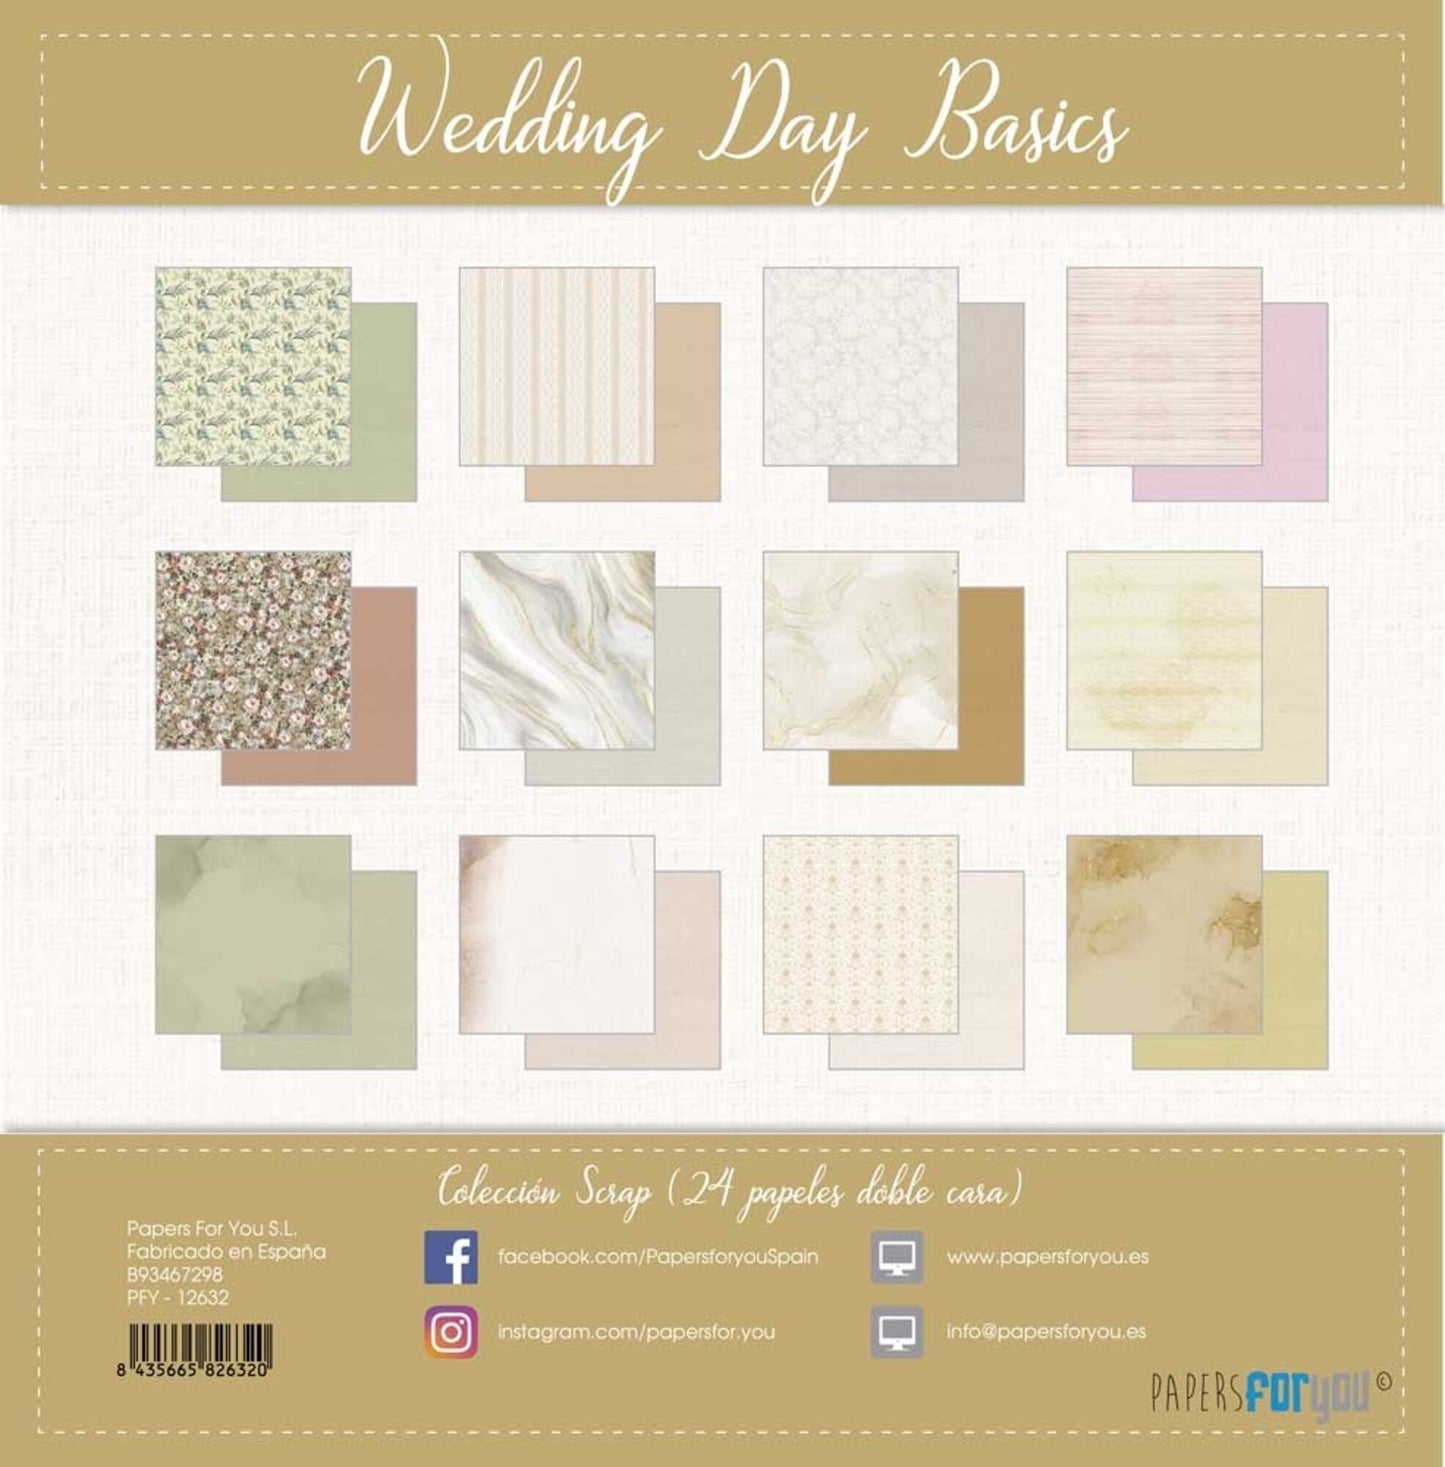 Papers For You Wedding Day Basics Midi Scrap Paper Pack (24pcs) (PFY-12632) 8x8 inch